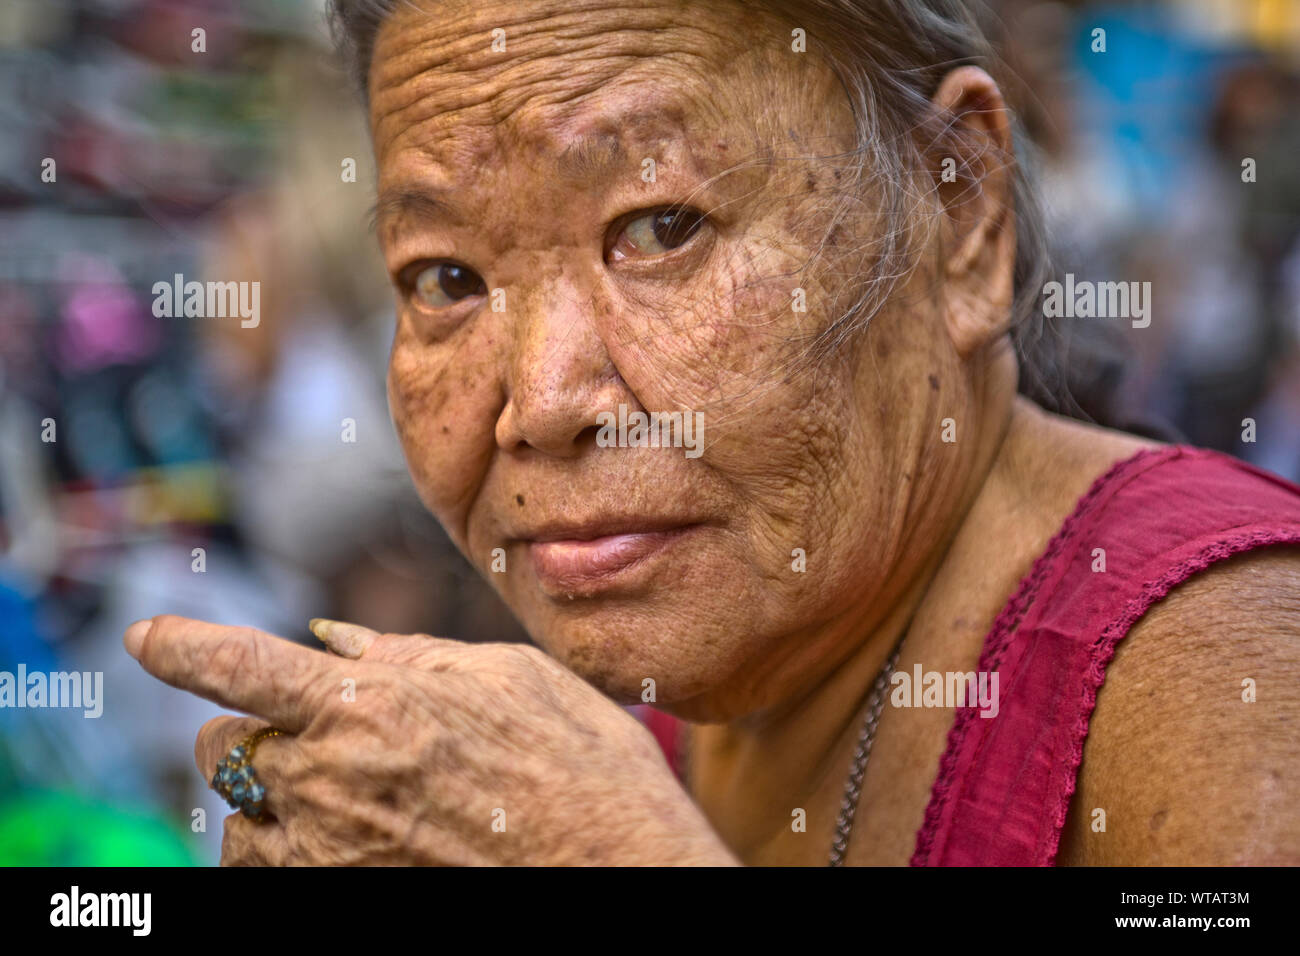 Old woman in the streets of Chinatown Stock Photo